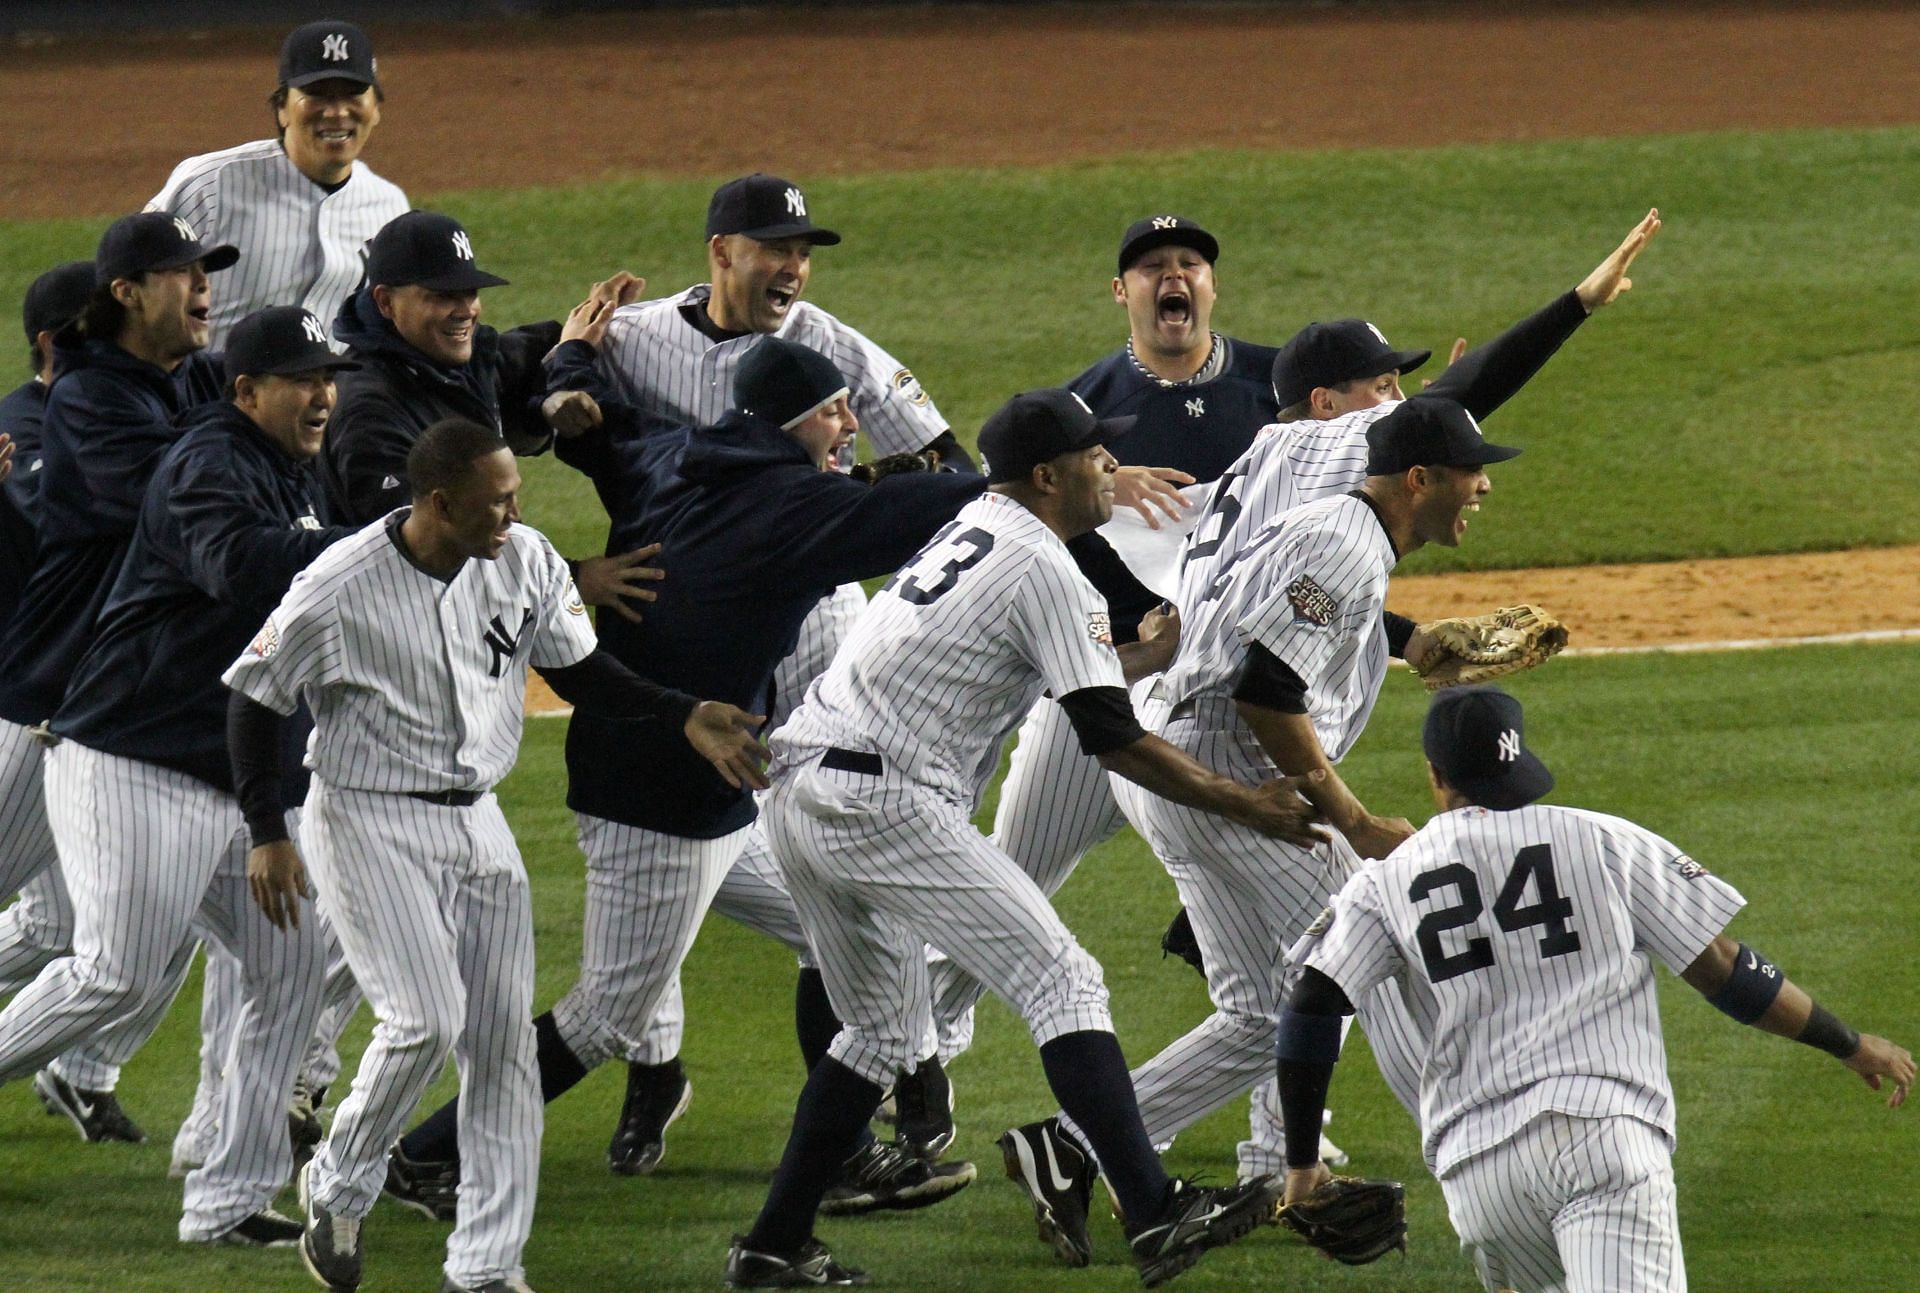 The New York Yankees celebrate after their 7-3 win against the Philadelphia &lt;a href=&#039;https://www.sportskeeda.com/team/philadelphia-phillies&#039; target=&#039;_blank&#039; rel=&#039;noopener noreferrer&#039;&gt;Phillies&lt;/a&gt; in Game Six of the 2009 MLB World Series at Yankee Stadium on November 4, 2009, in the Bronx borough of New York City. (Photo by Jim McIsaac/Getty Images)